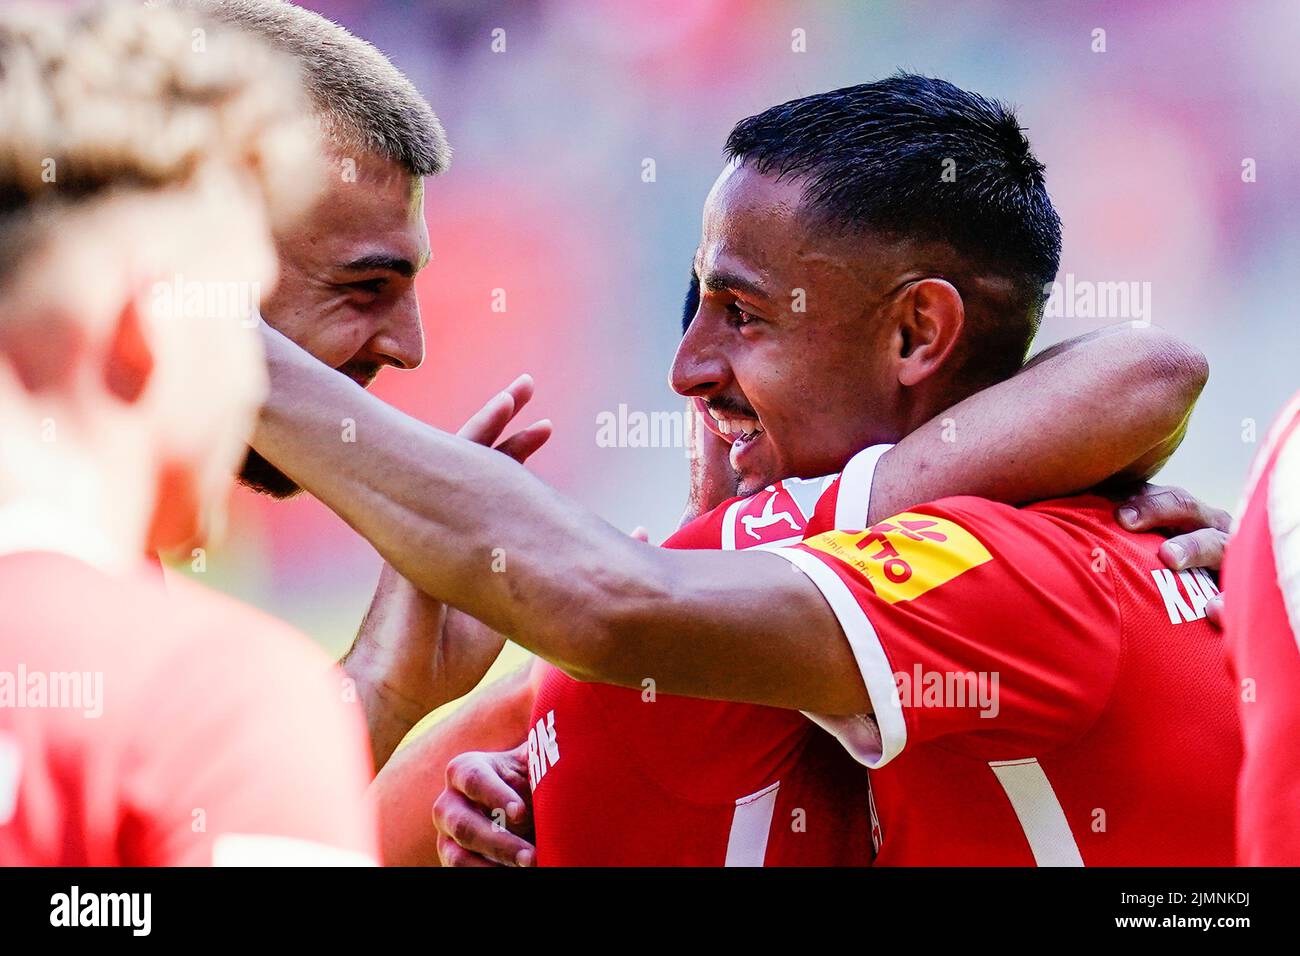 07 August 2022, Rhineland-Palatinate, Kaiserslautern: Soccer: 2nd Bundesliga, 1. FC Kaiserslautern - FC St. Pauli, Matchday 3, Fritz-Walter-Stadion. Kaiserslautern's goal scorer Kenny Prince Redondo (r) celebrates the victory with teammates. Photo: Uwe Anspach/dpa - IMPORTANT NOTE: In accordance with the requirements of the DFL Deutsche Fußball Liga and the DFB Deutscher Fußball-Bund, it is prohibited to use or have used photographs taken in the stadium and/or of the match in the form of sequence pictures and/or video-like photo series. Stock Photo